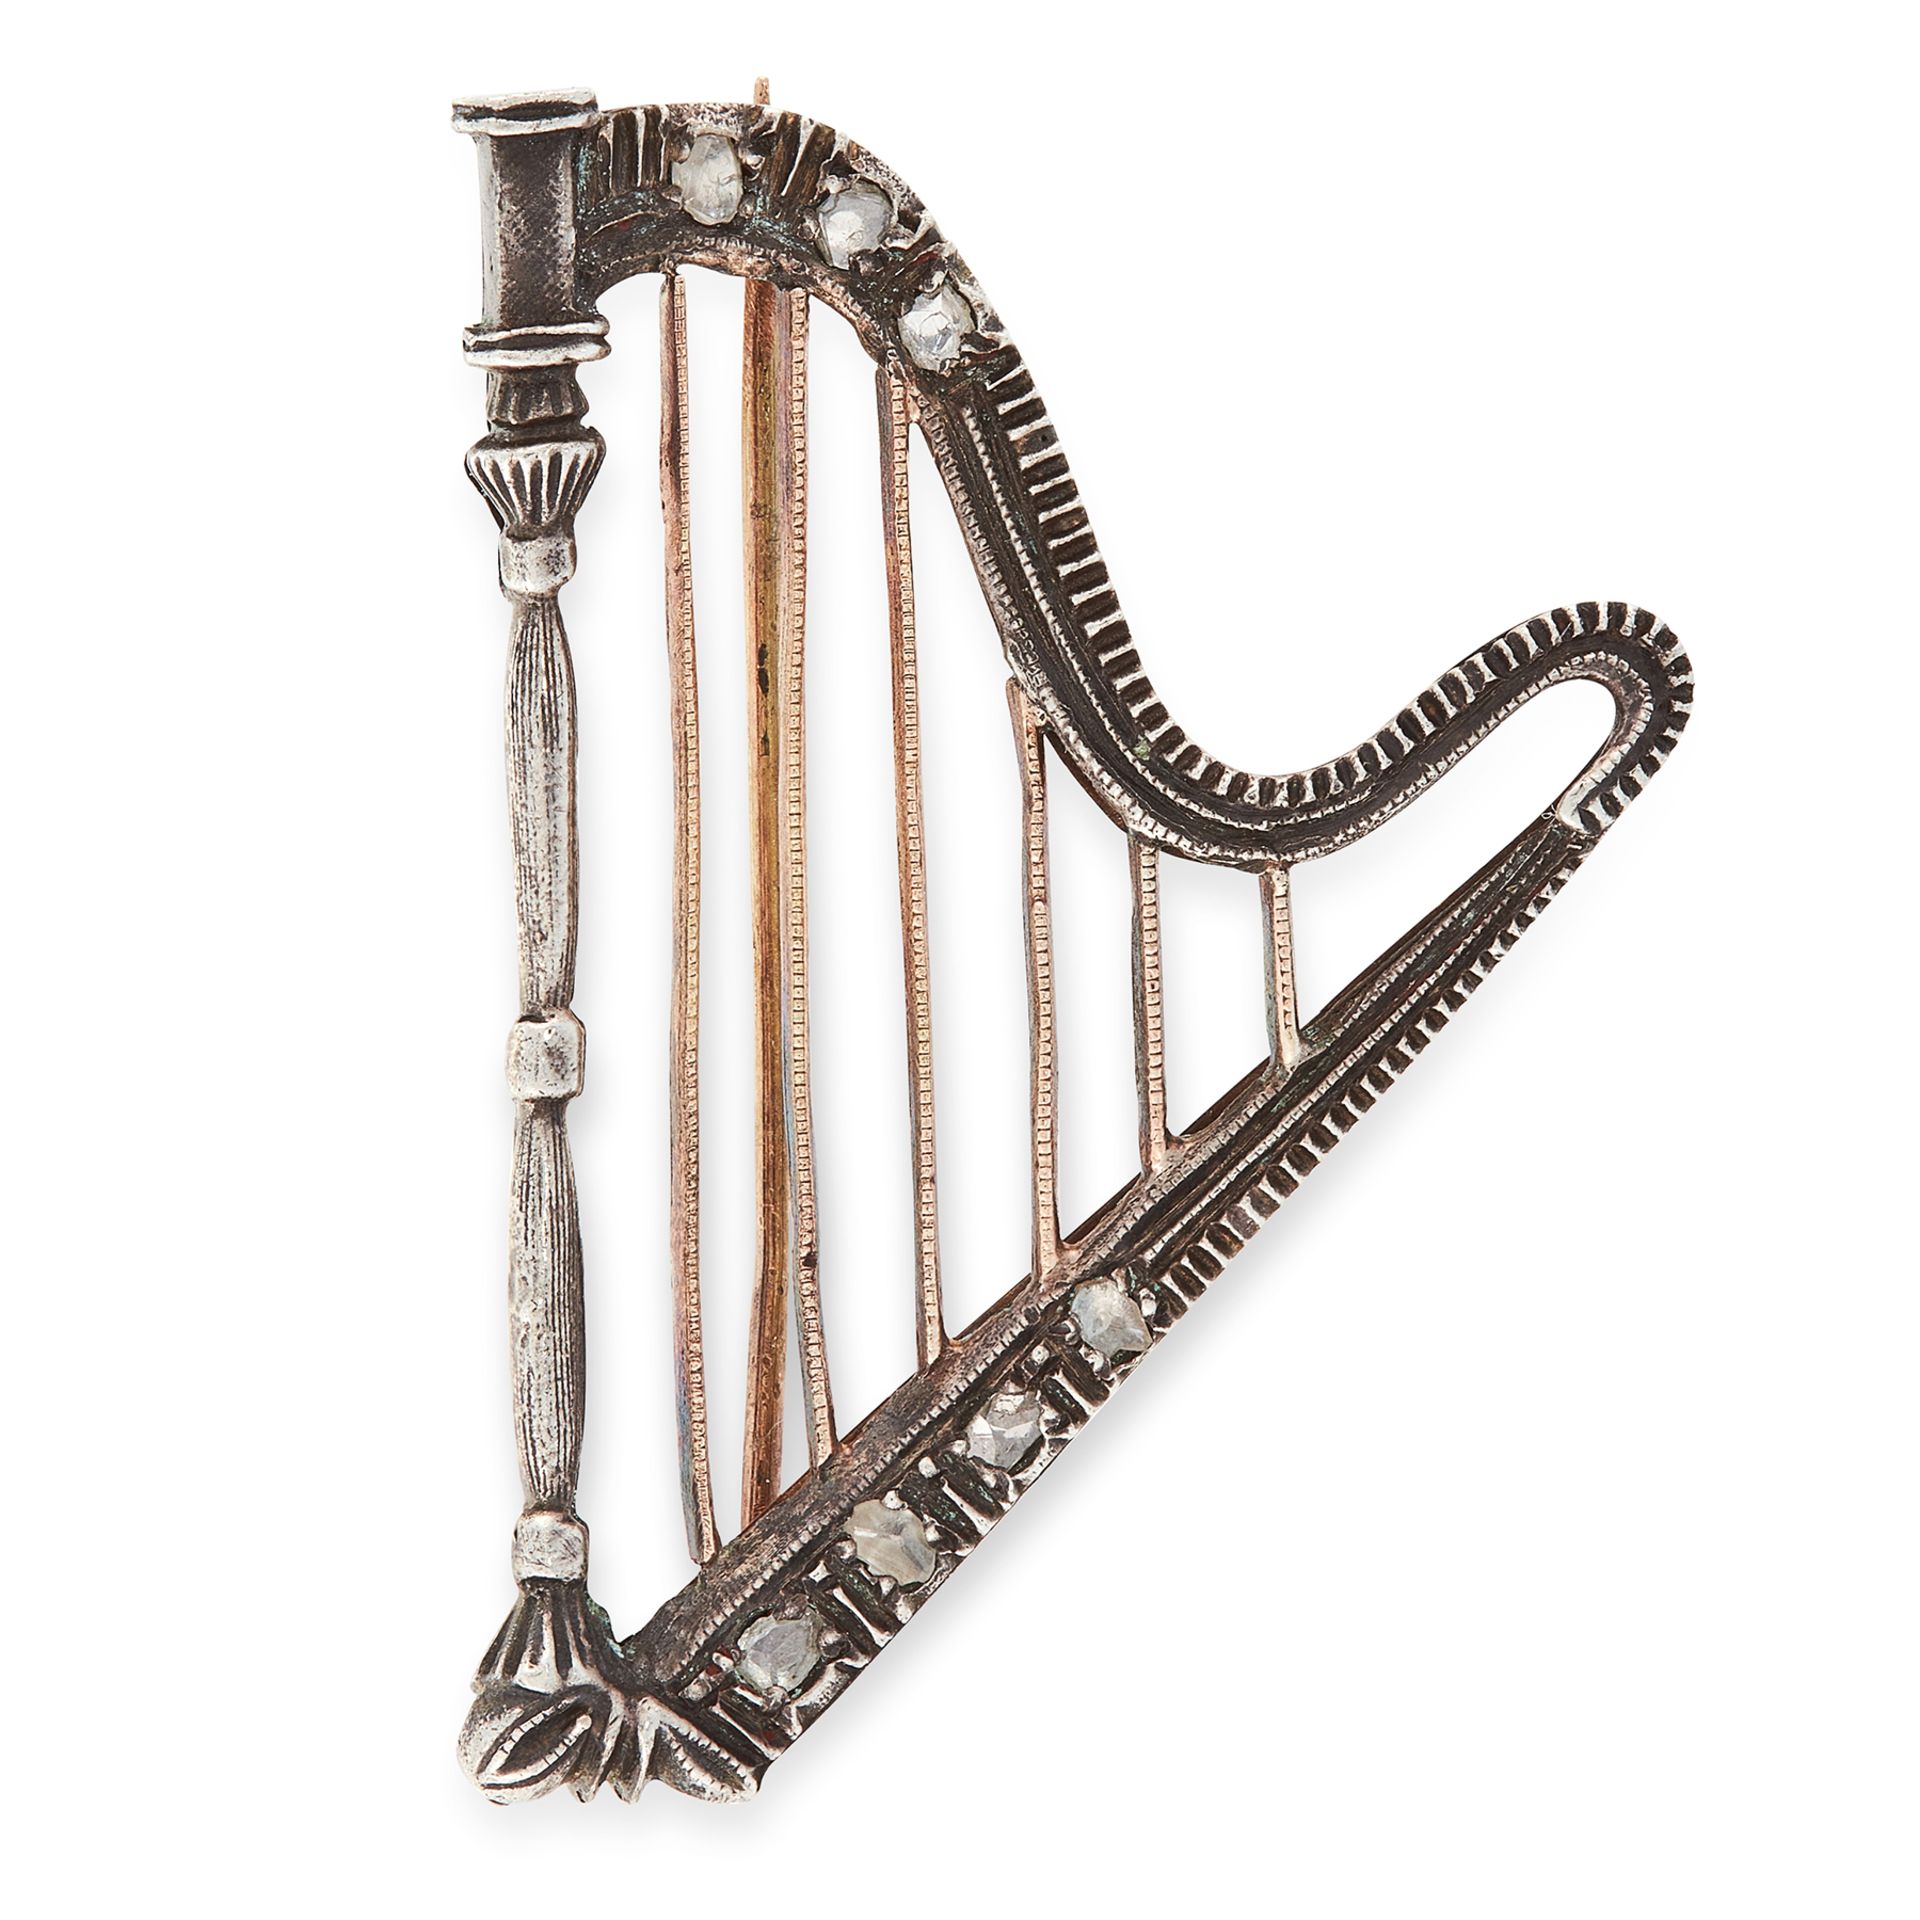 AN ANTIQUE DIAMOND HARP BROOCH in yellow gold and silver, designed as harp, jewelled with rose cut